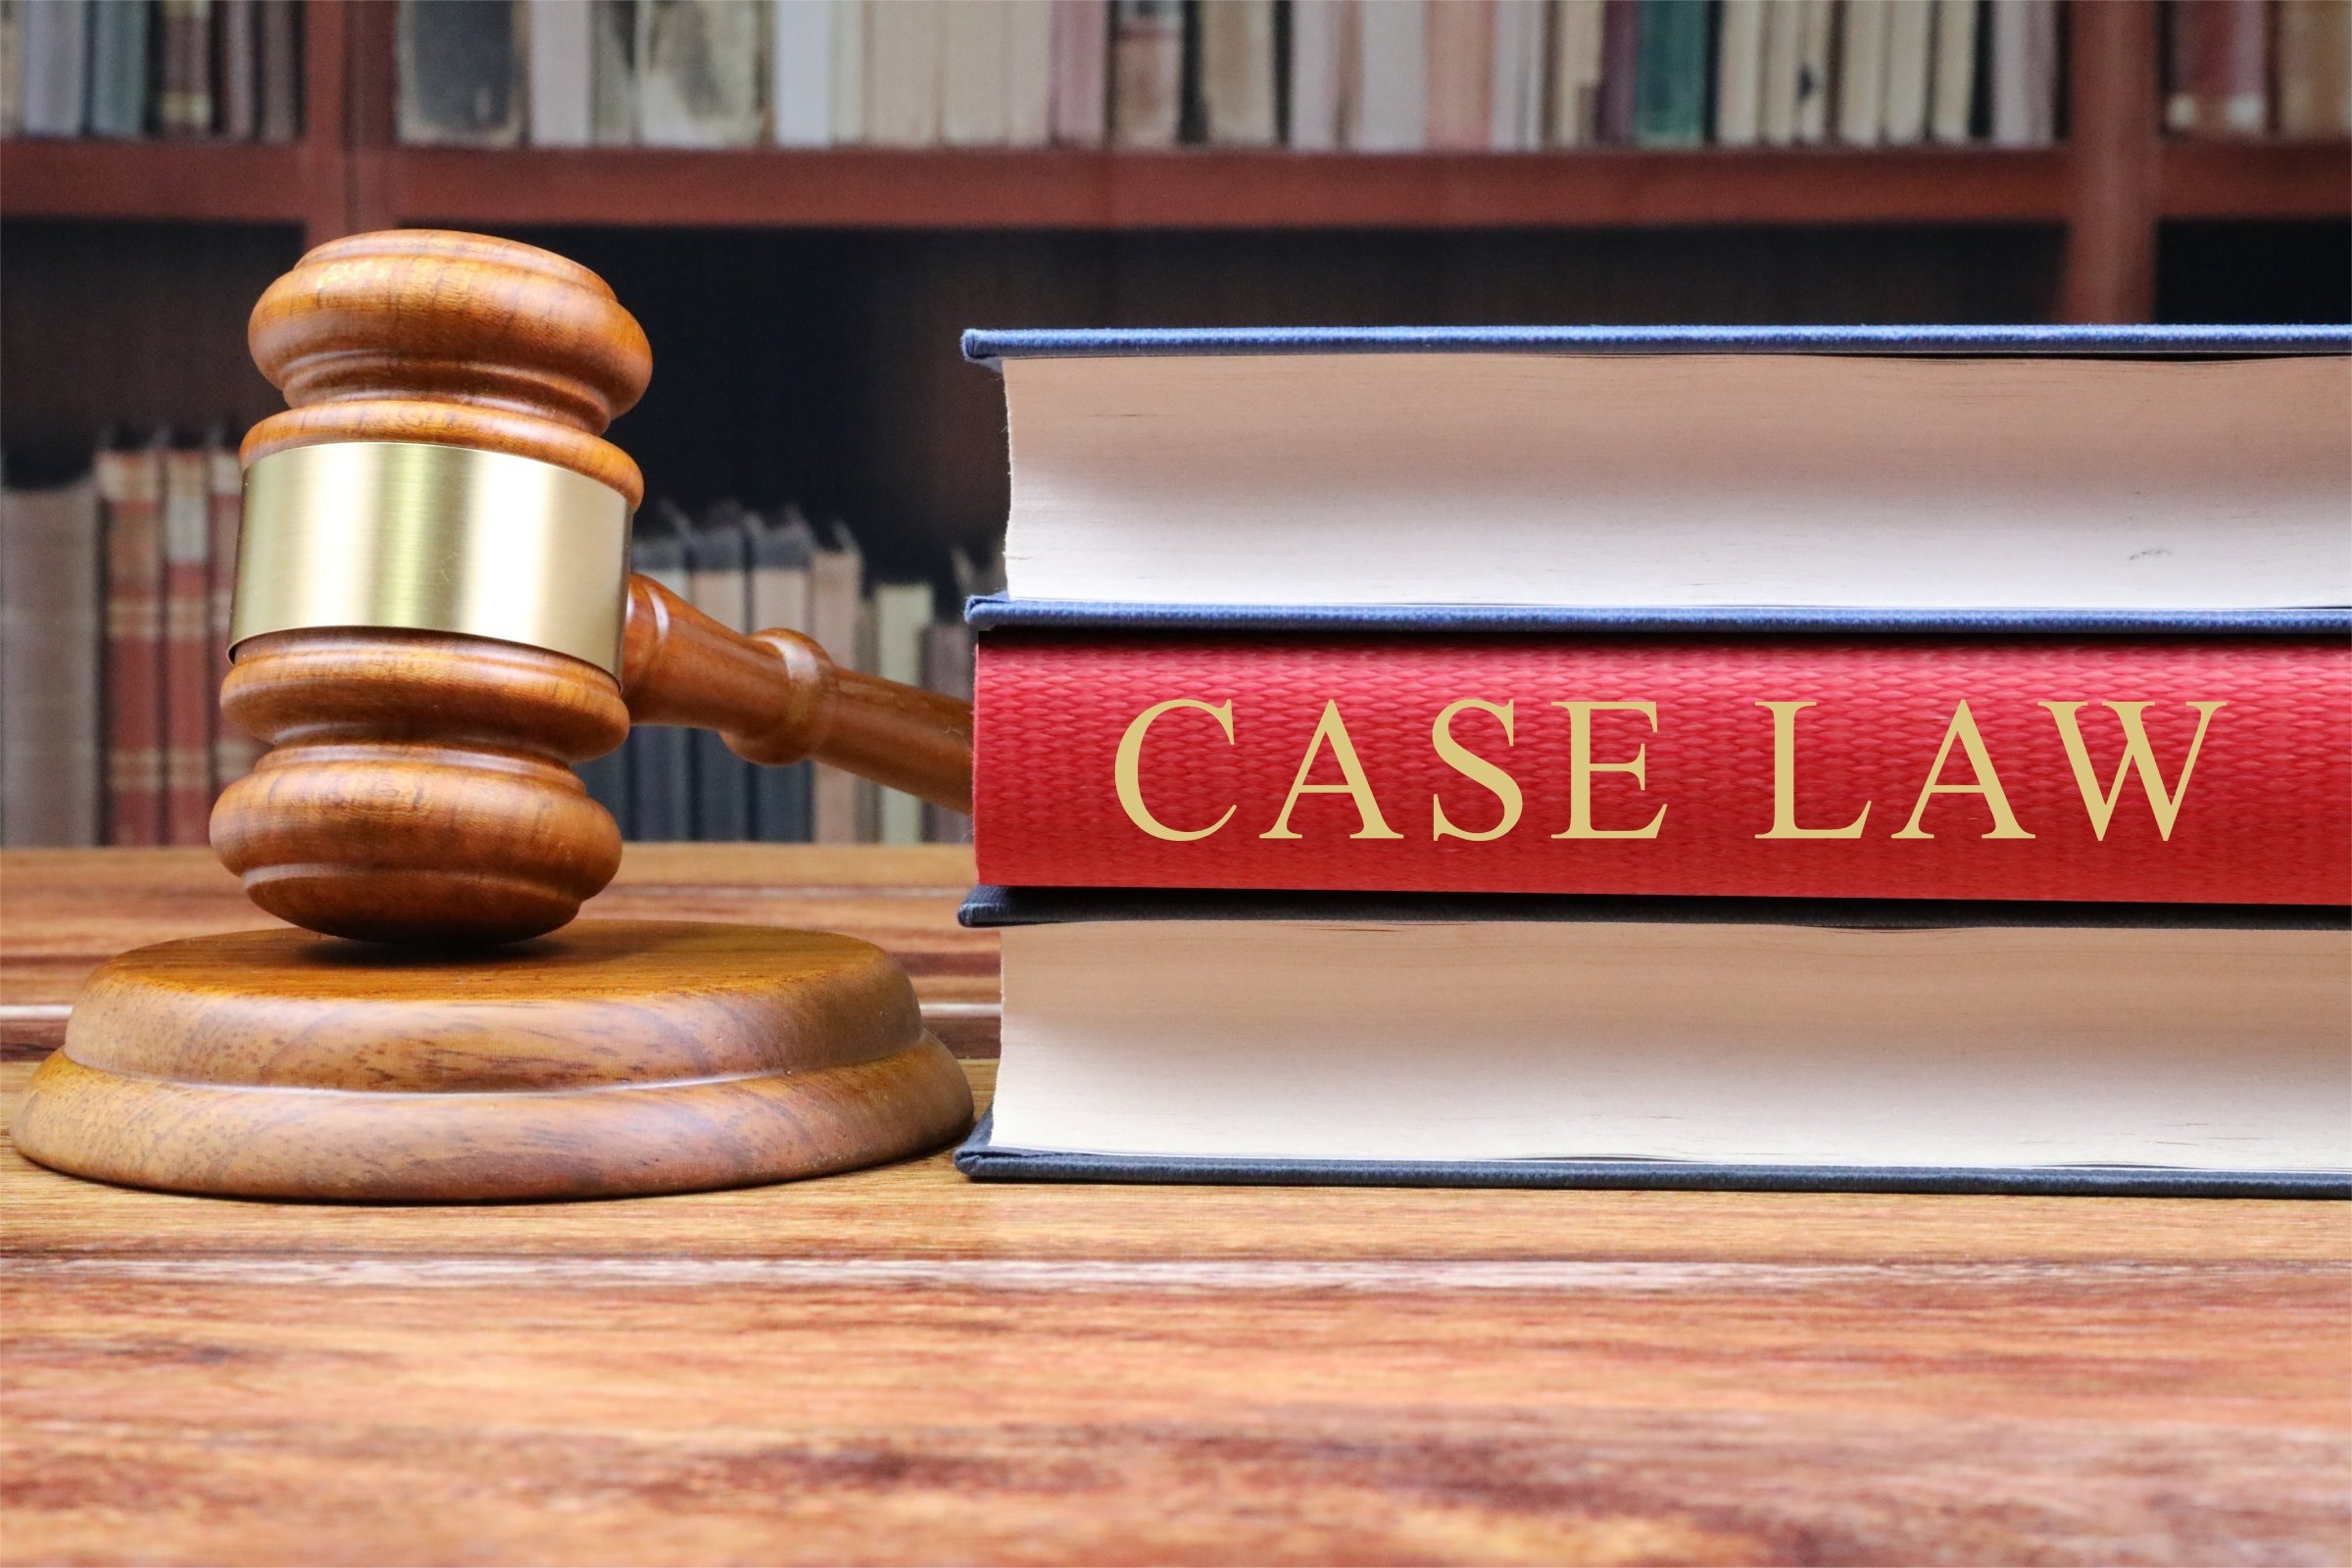 free legal research case law